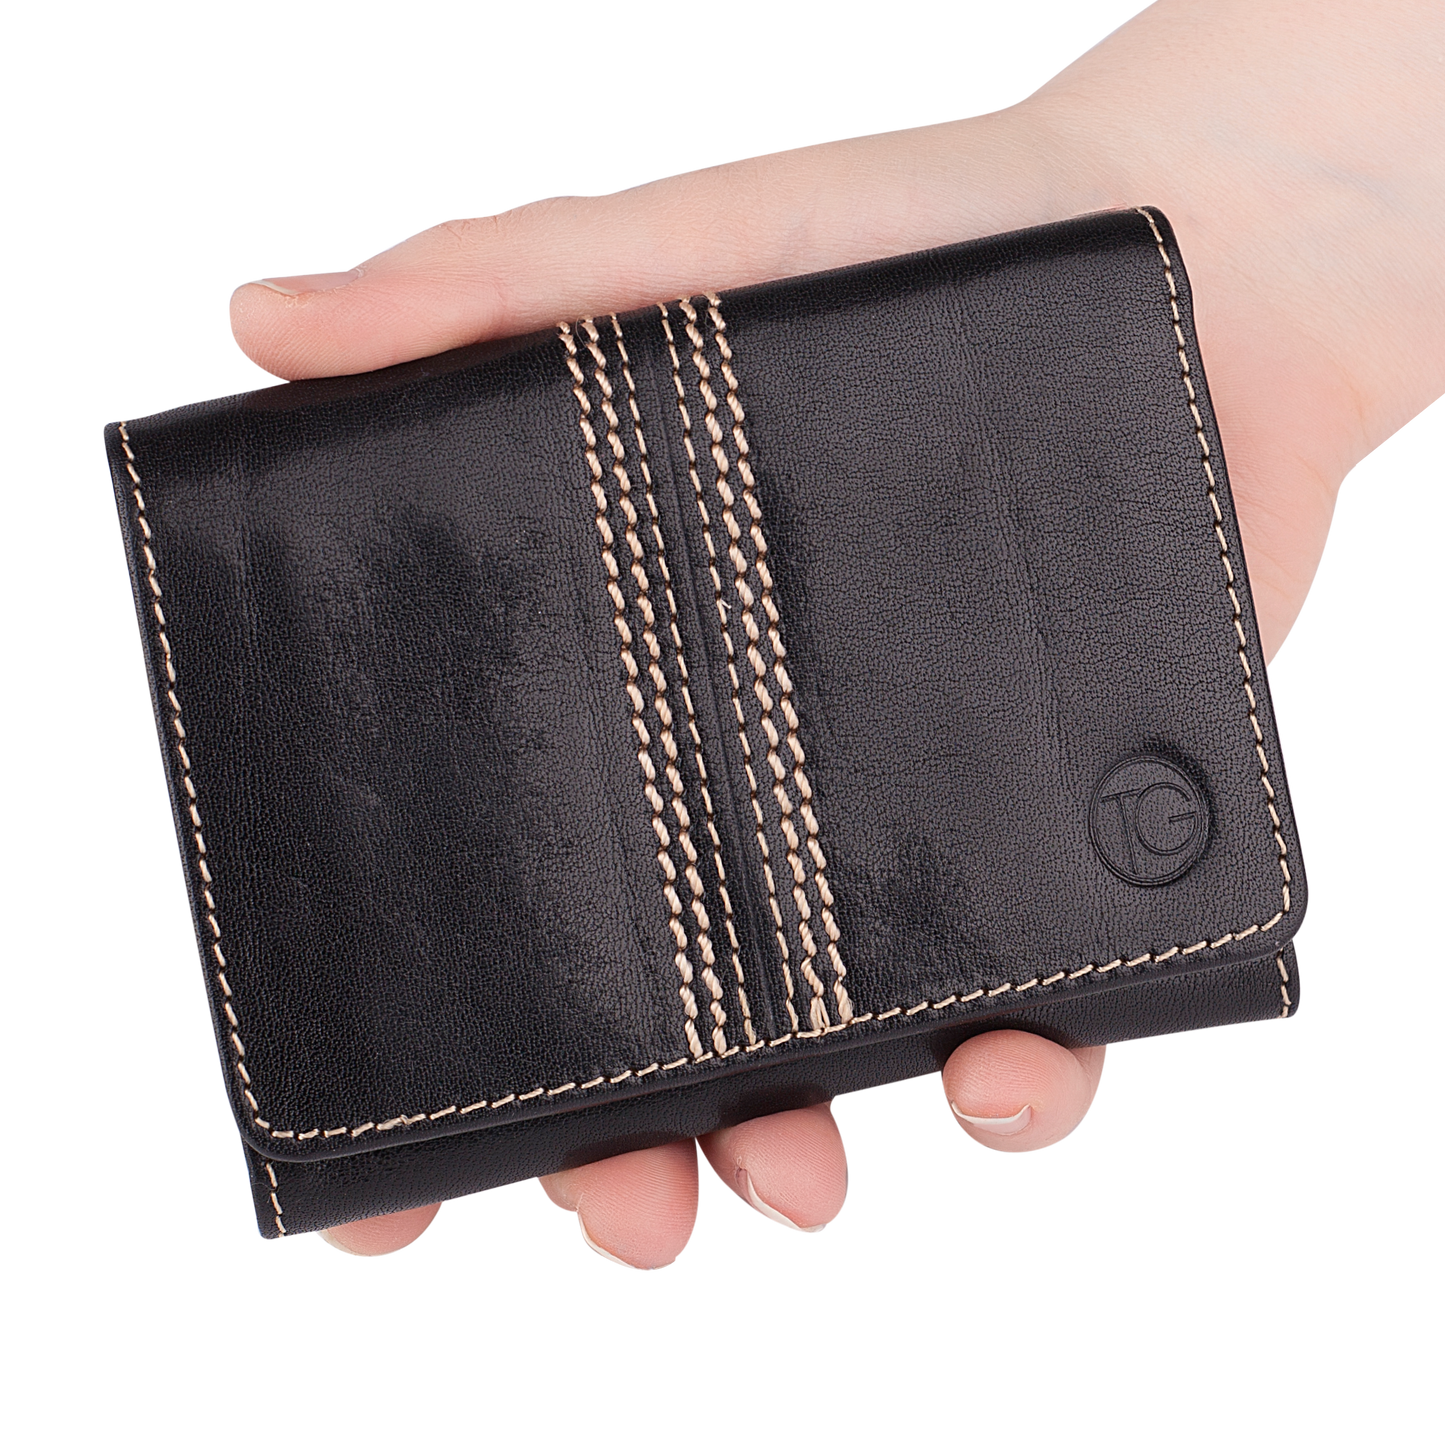 The Keeper Trifold Wallet